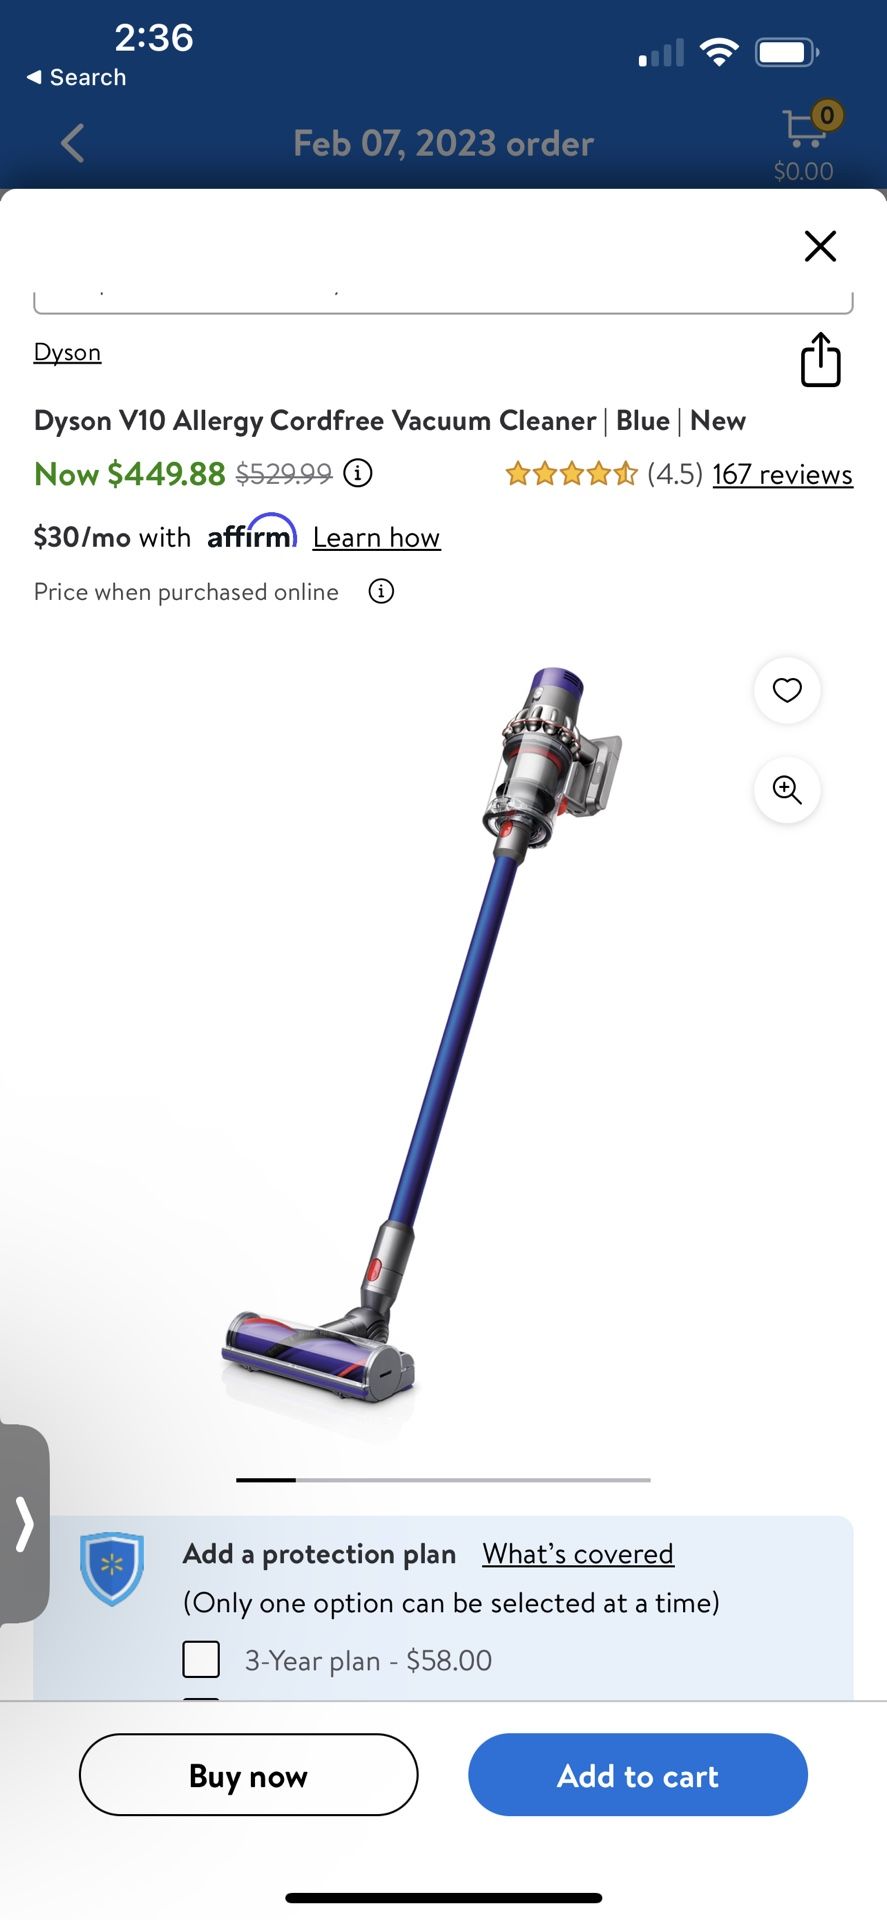 Dyson V10 Allergy Cord free Vacuum Cleaner 